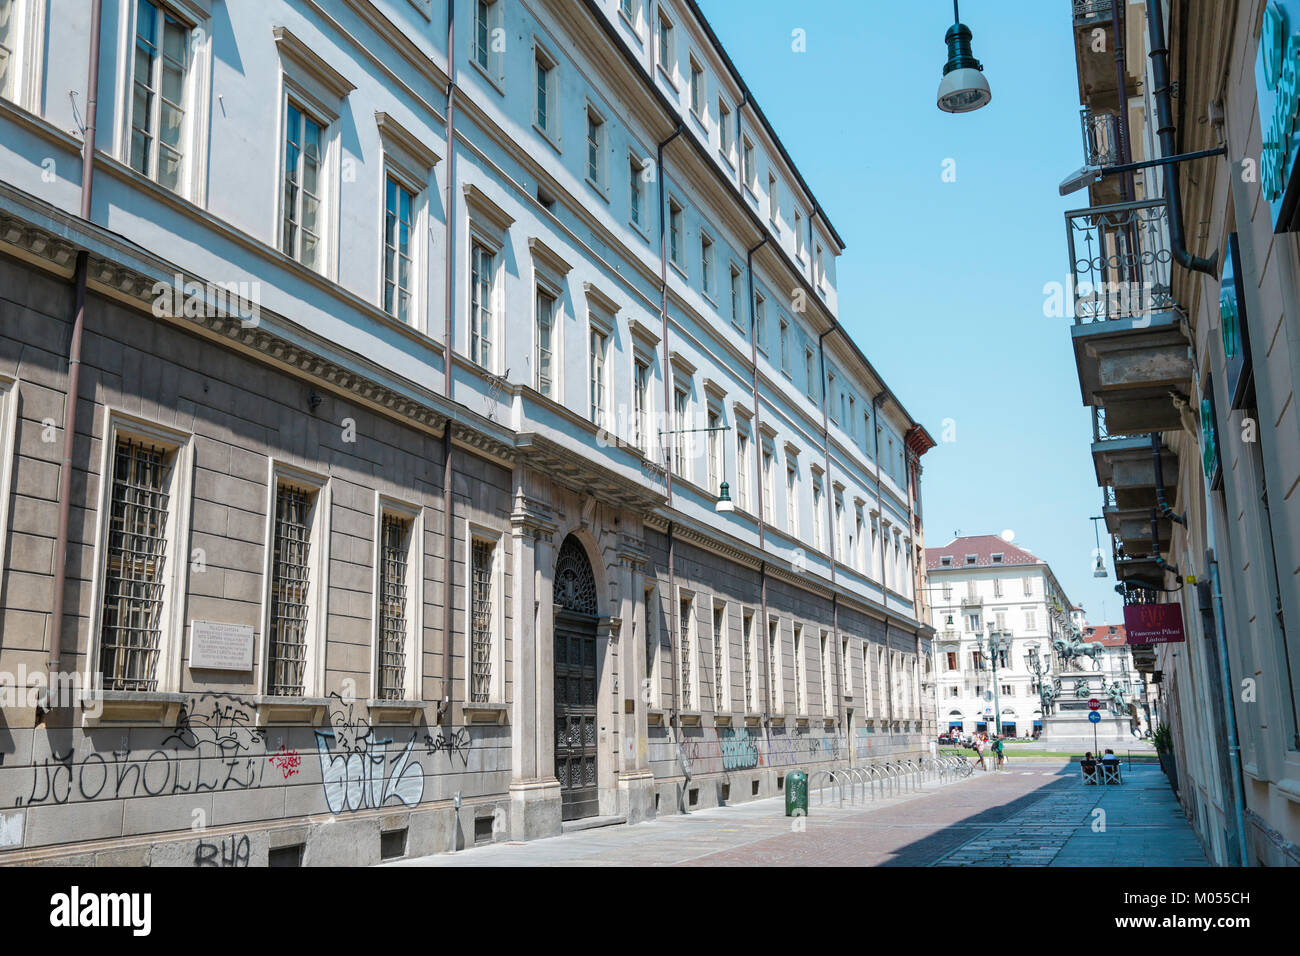 Turin, Italy: Palazzo Campana, university of Maths and science, and historical palaces in the city center, interiors and external view, in a sunny day Stock Photo